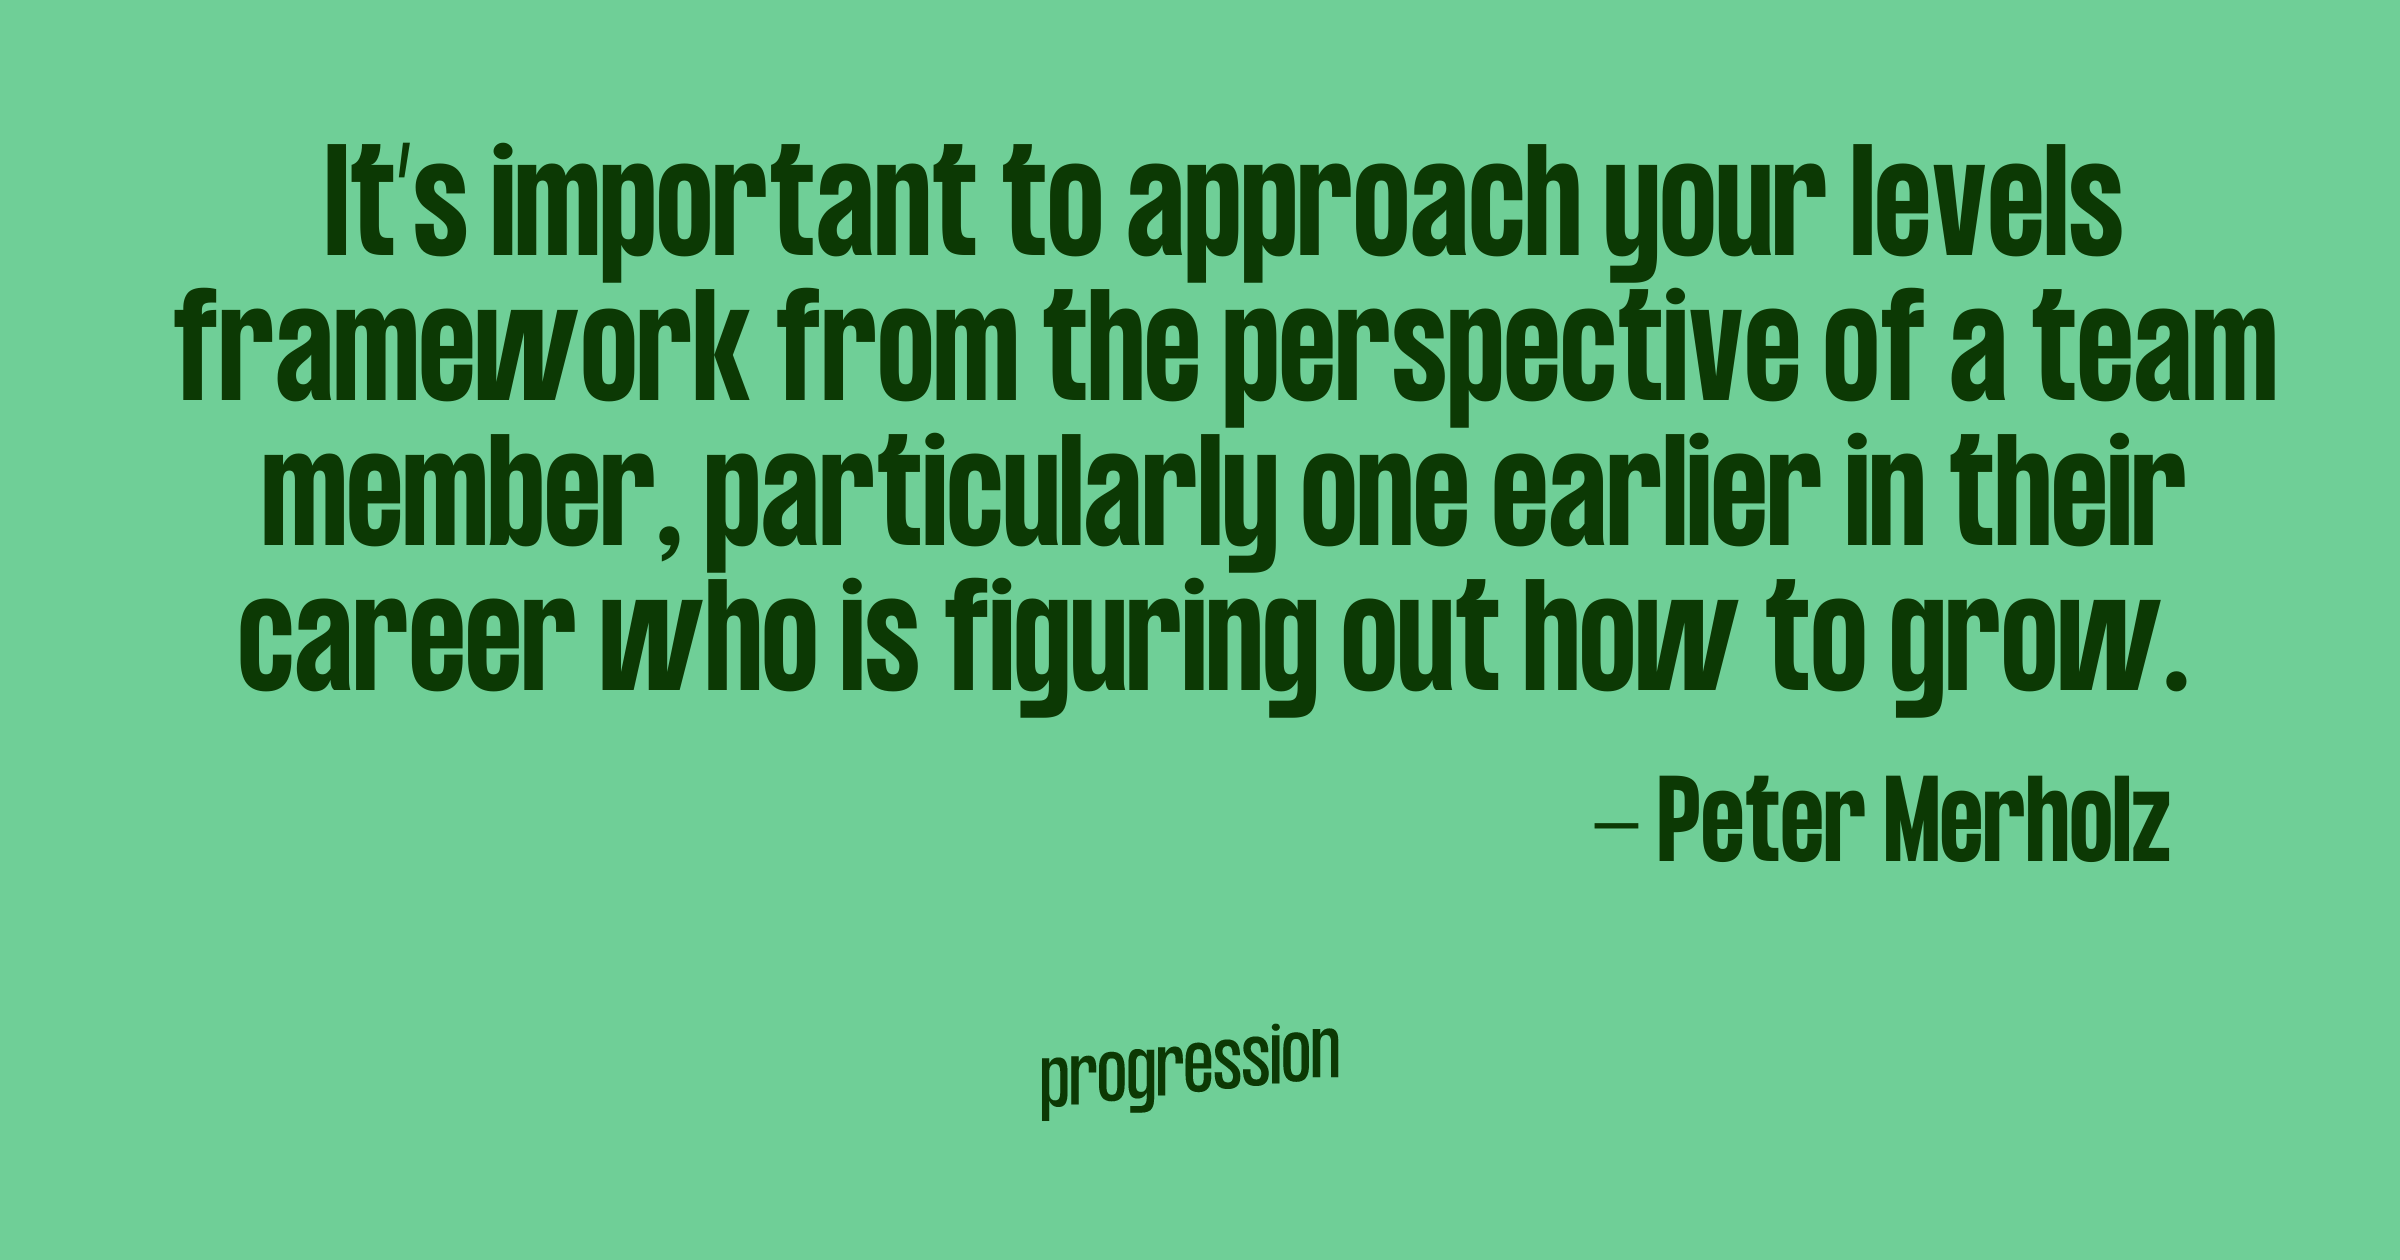 Quote from Peter Merholz - it's important to approach your levels framework from the perspective of a team member, particularly one earlier in their career who is figuring out how to grow